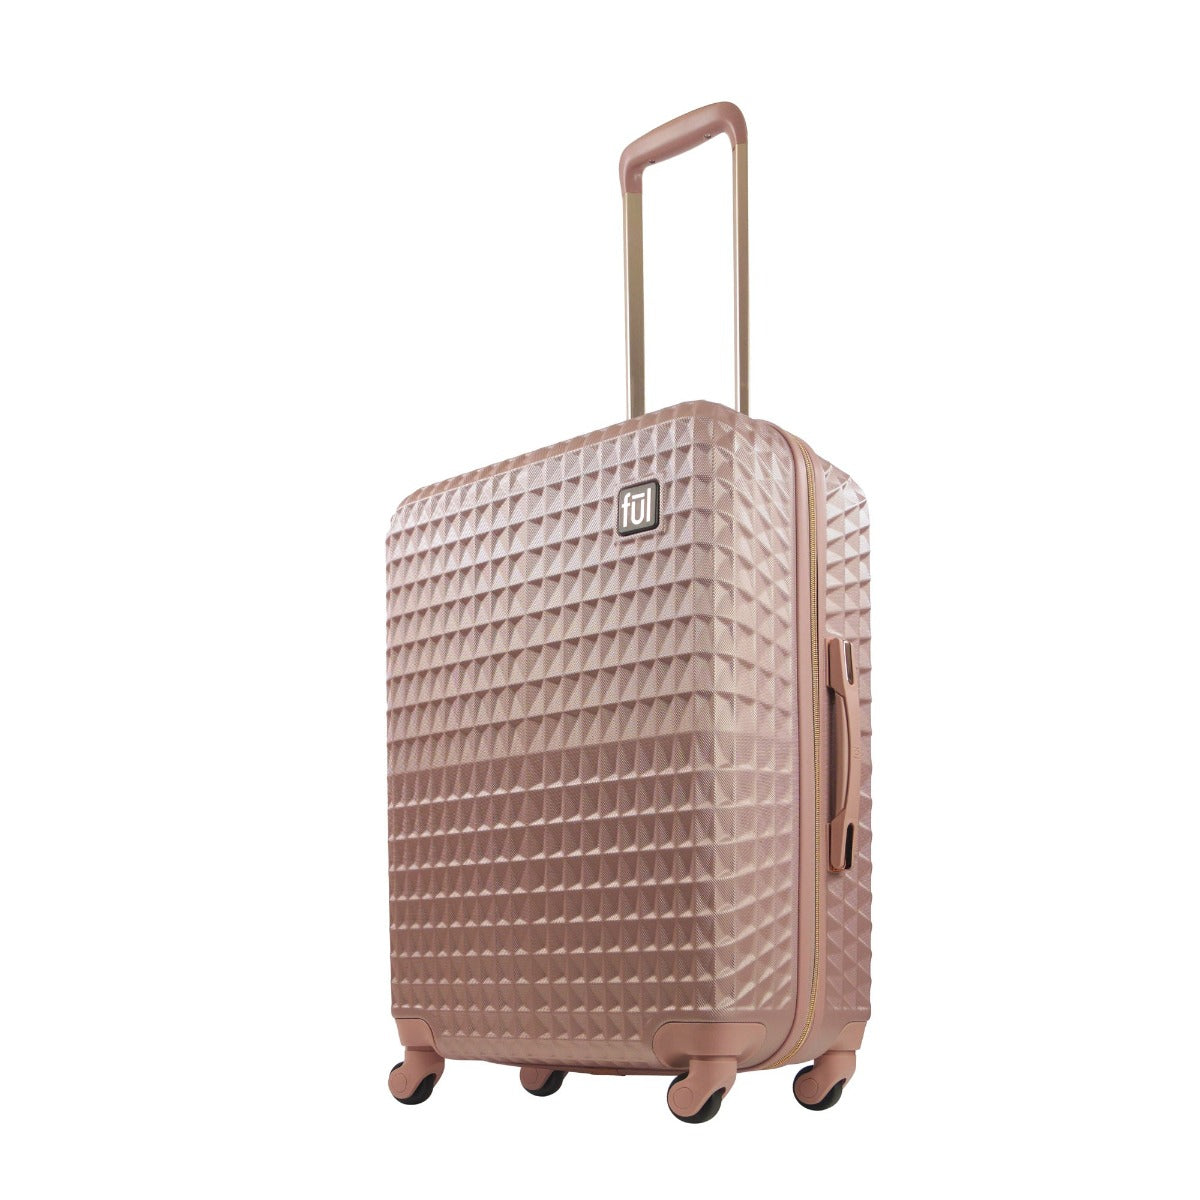 Ful Geo 26" hard sided spinner suitcase luggage rose gold